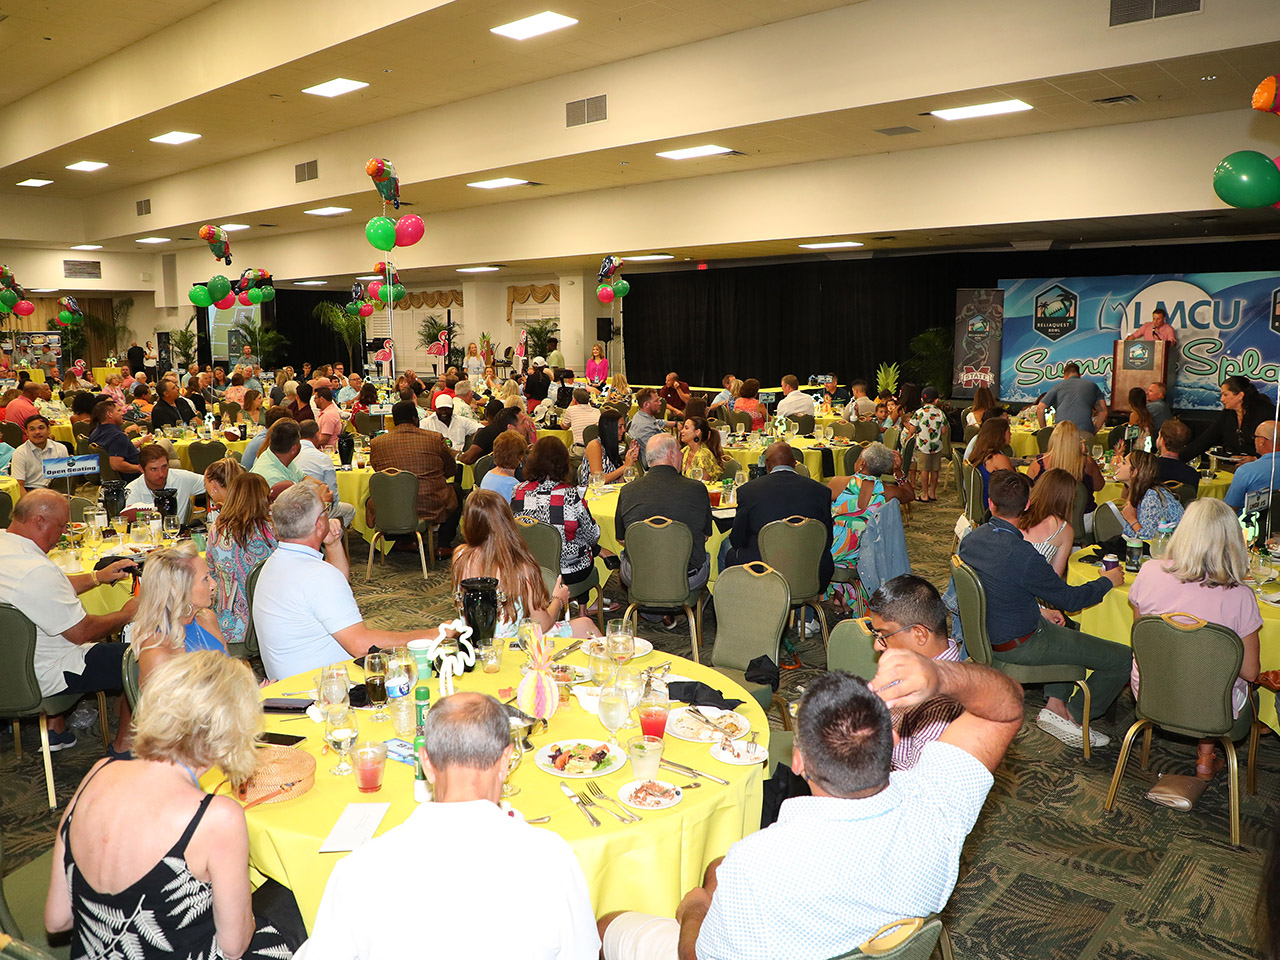 About 700 supporters and guests were on hand for the banquet